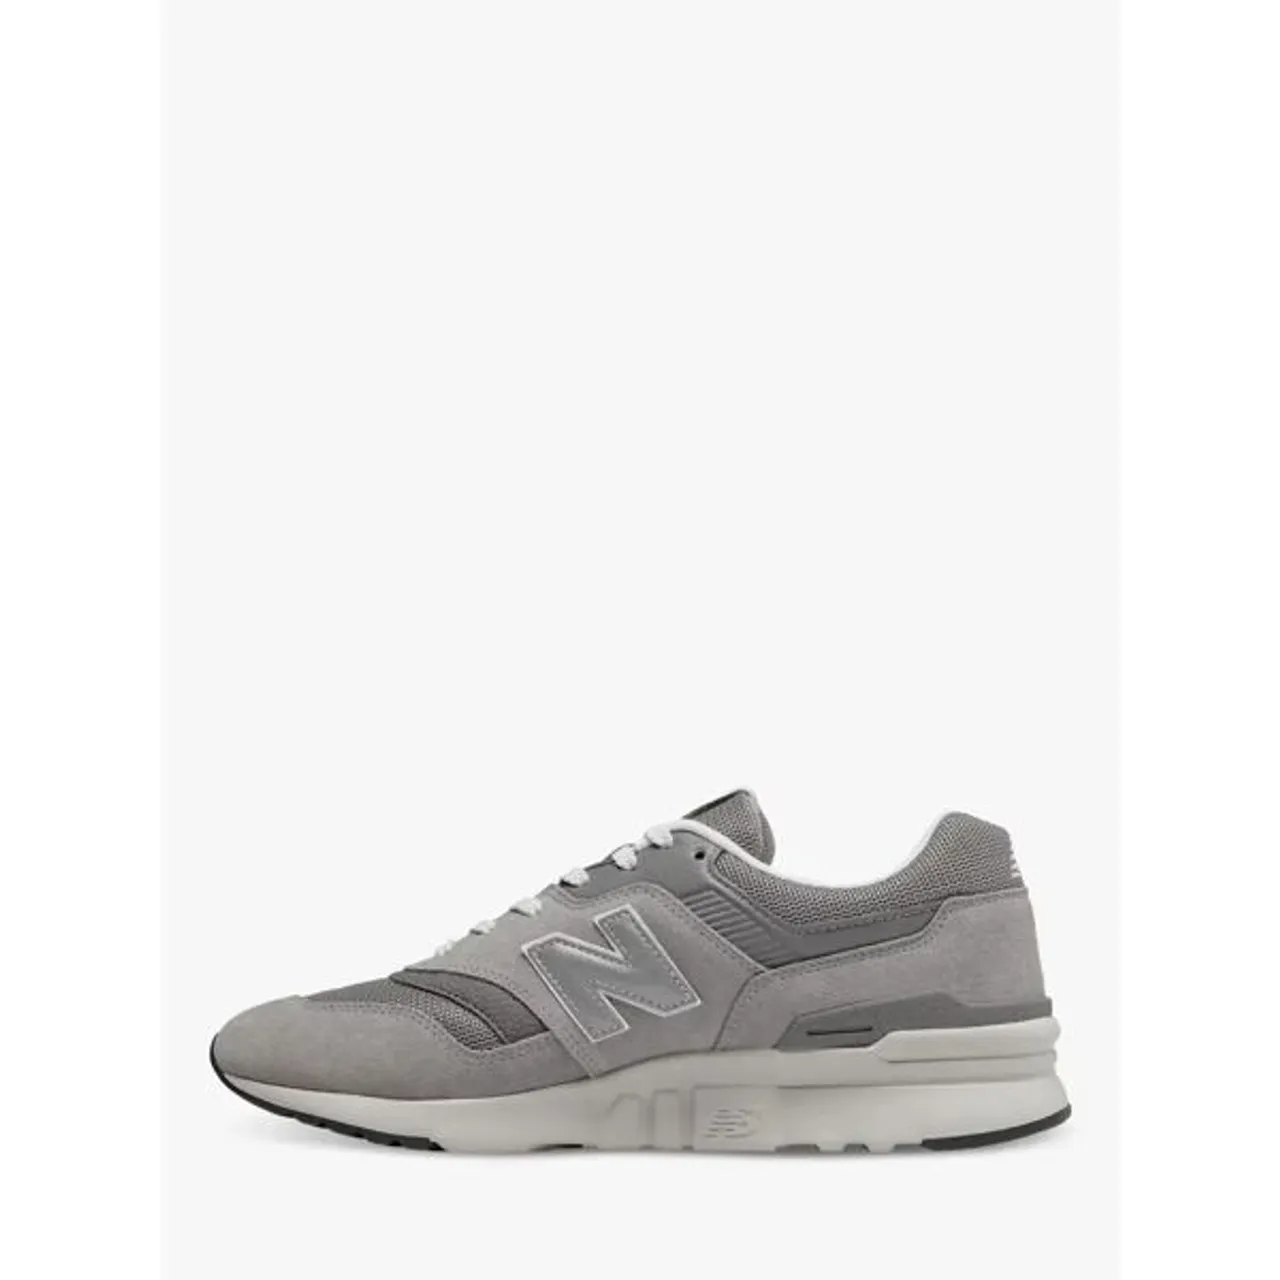 New Balance 997H Men's Suede Trainers - Grey - Male